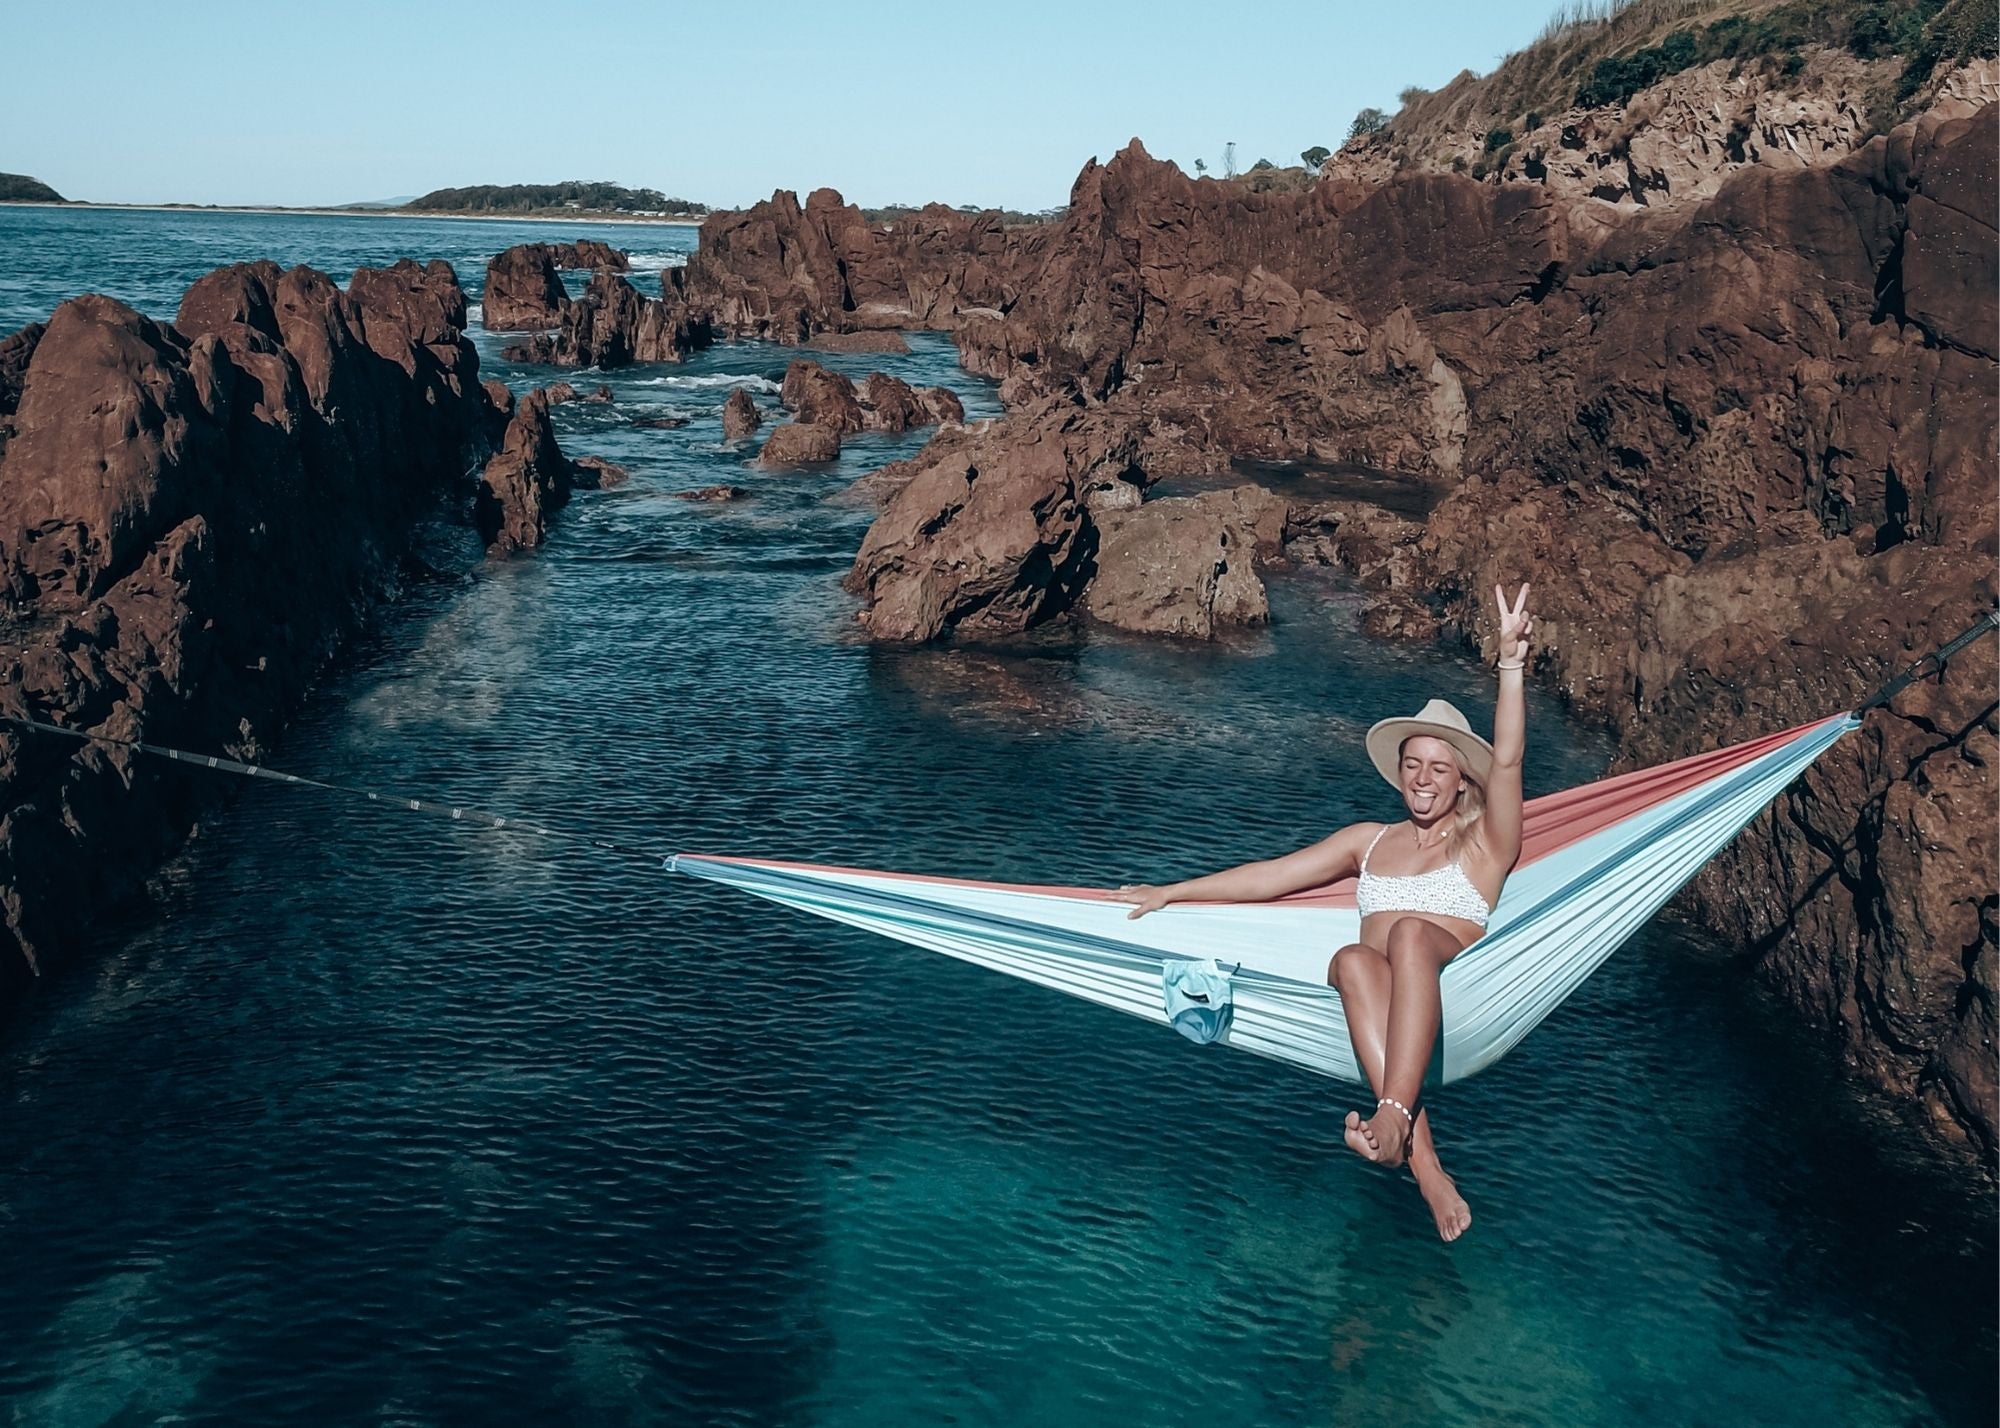 Sky Blue - Recycled Hammock with Straps